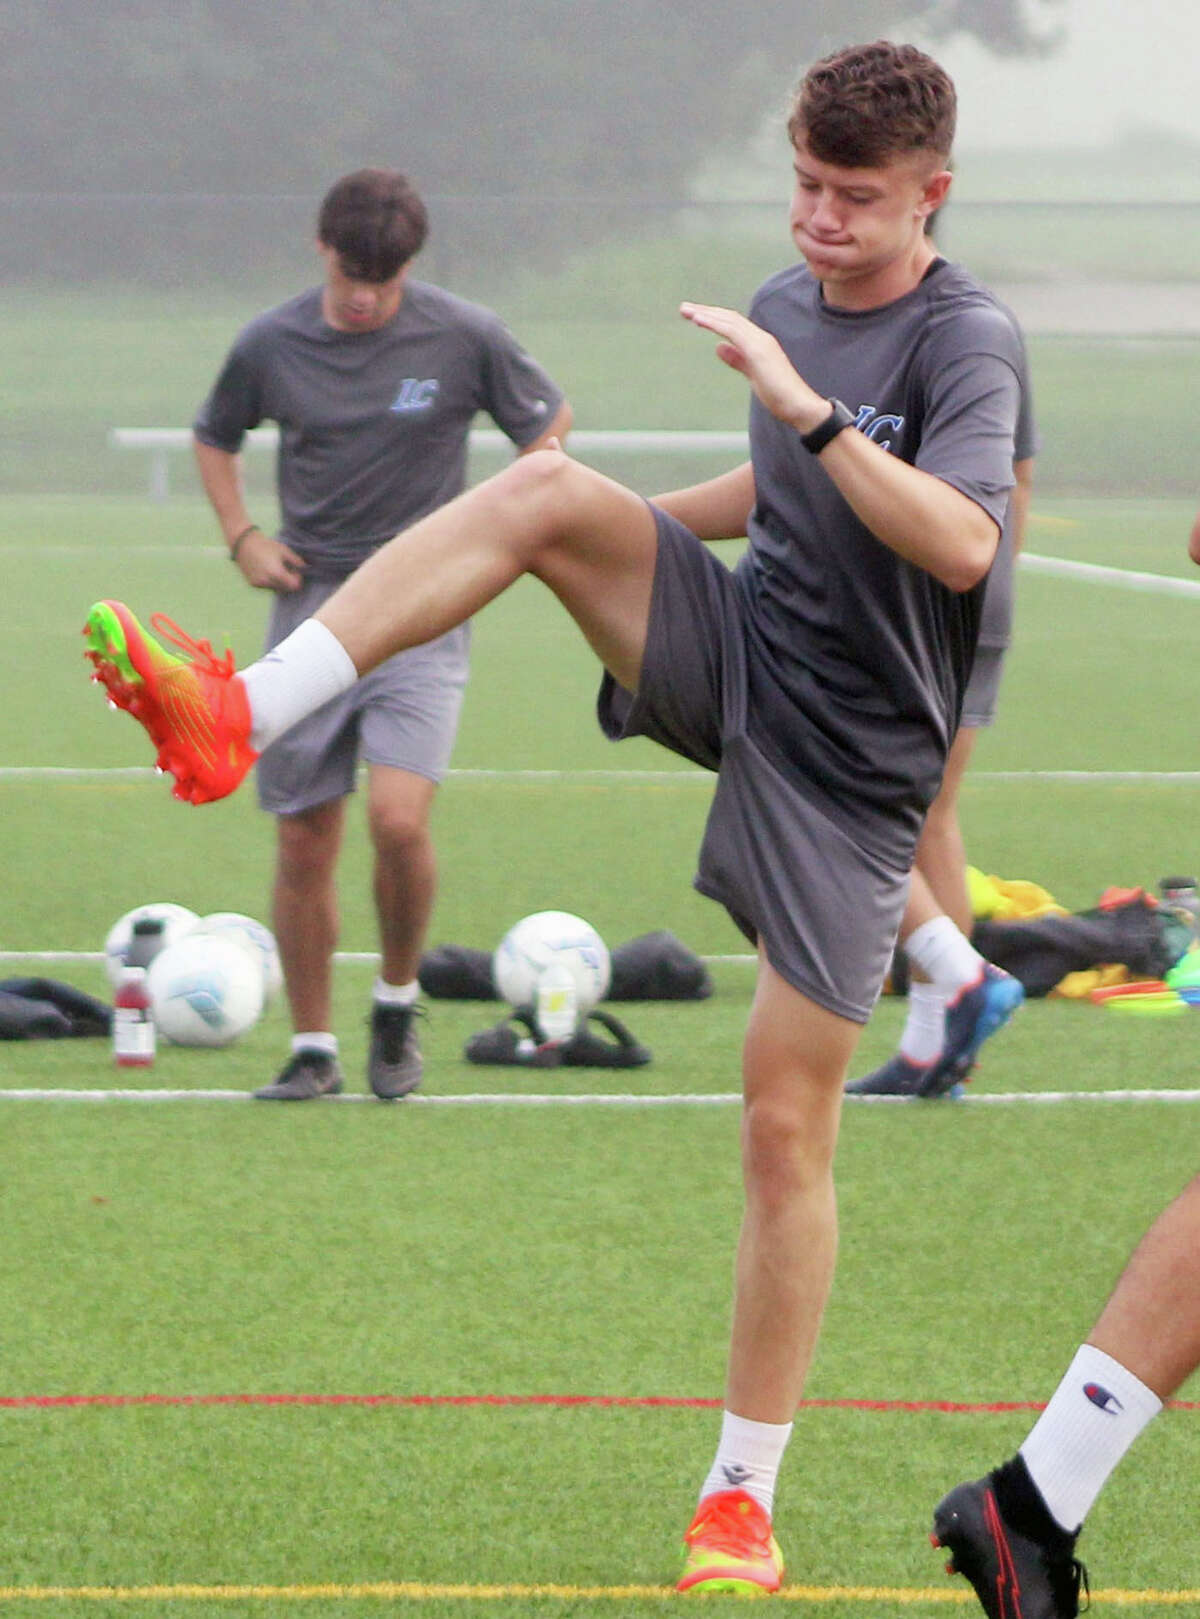 LCCC soccer player Josh Macklin goes through a pre-practice stretching exercise Friday at Glazebrook Park in Godfrey.